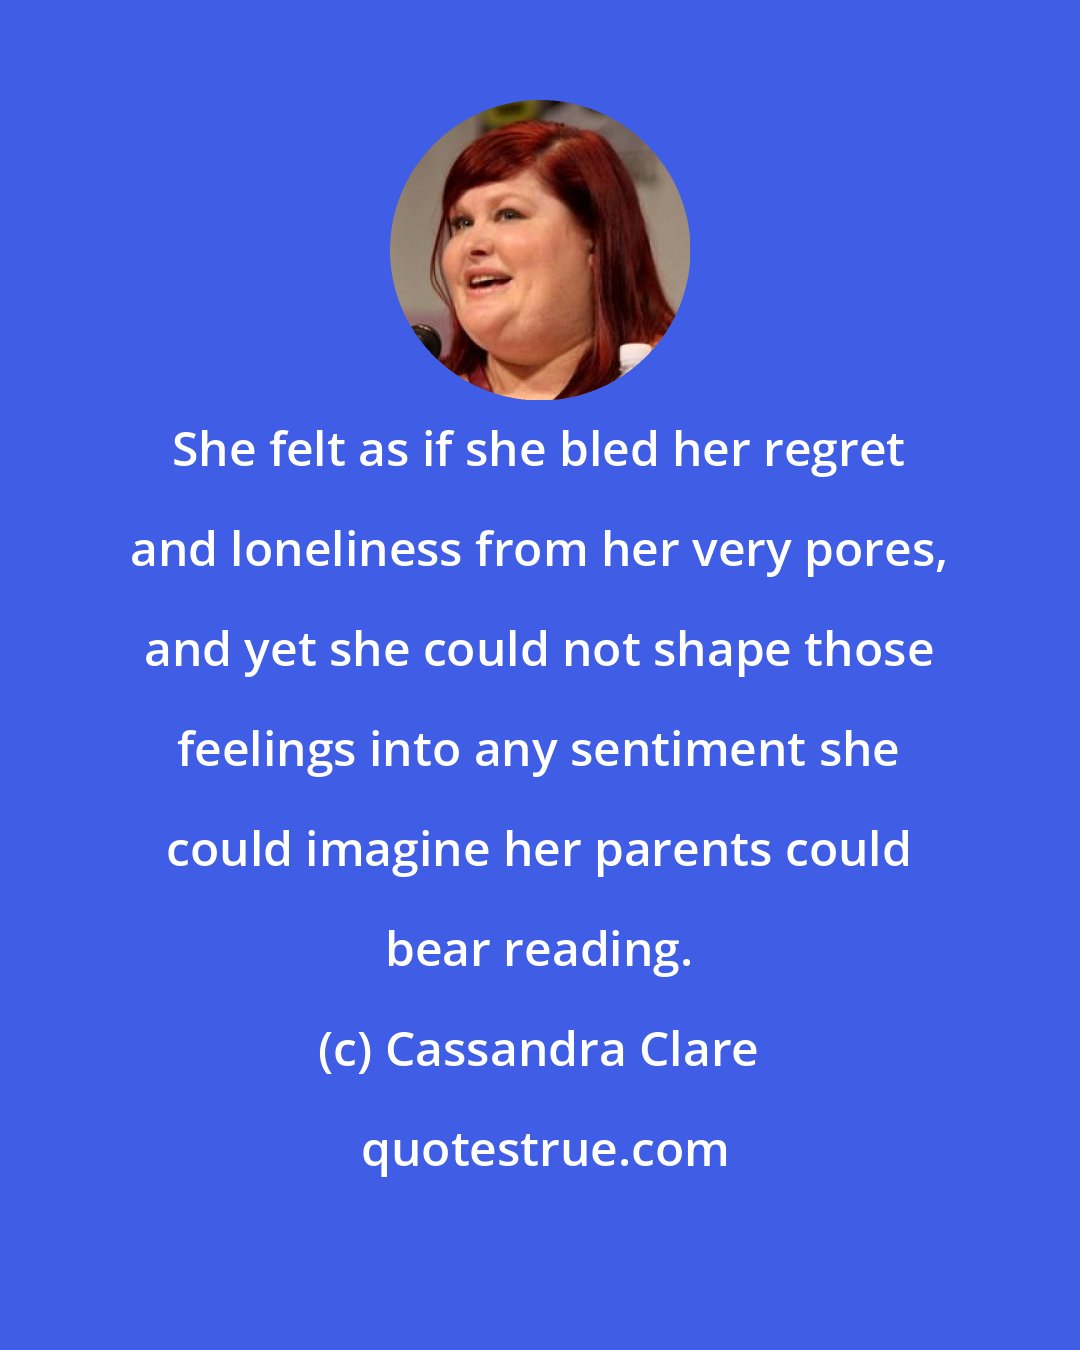 Cassandra Clare: She felt as if she bled her regret and loneliness from her very pores, and yet she could not shape those feelings into any sentiment she could imagine her parents could bear reading.